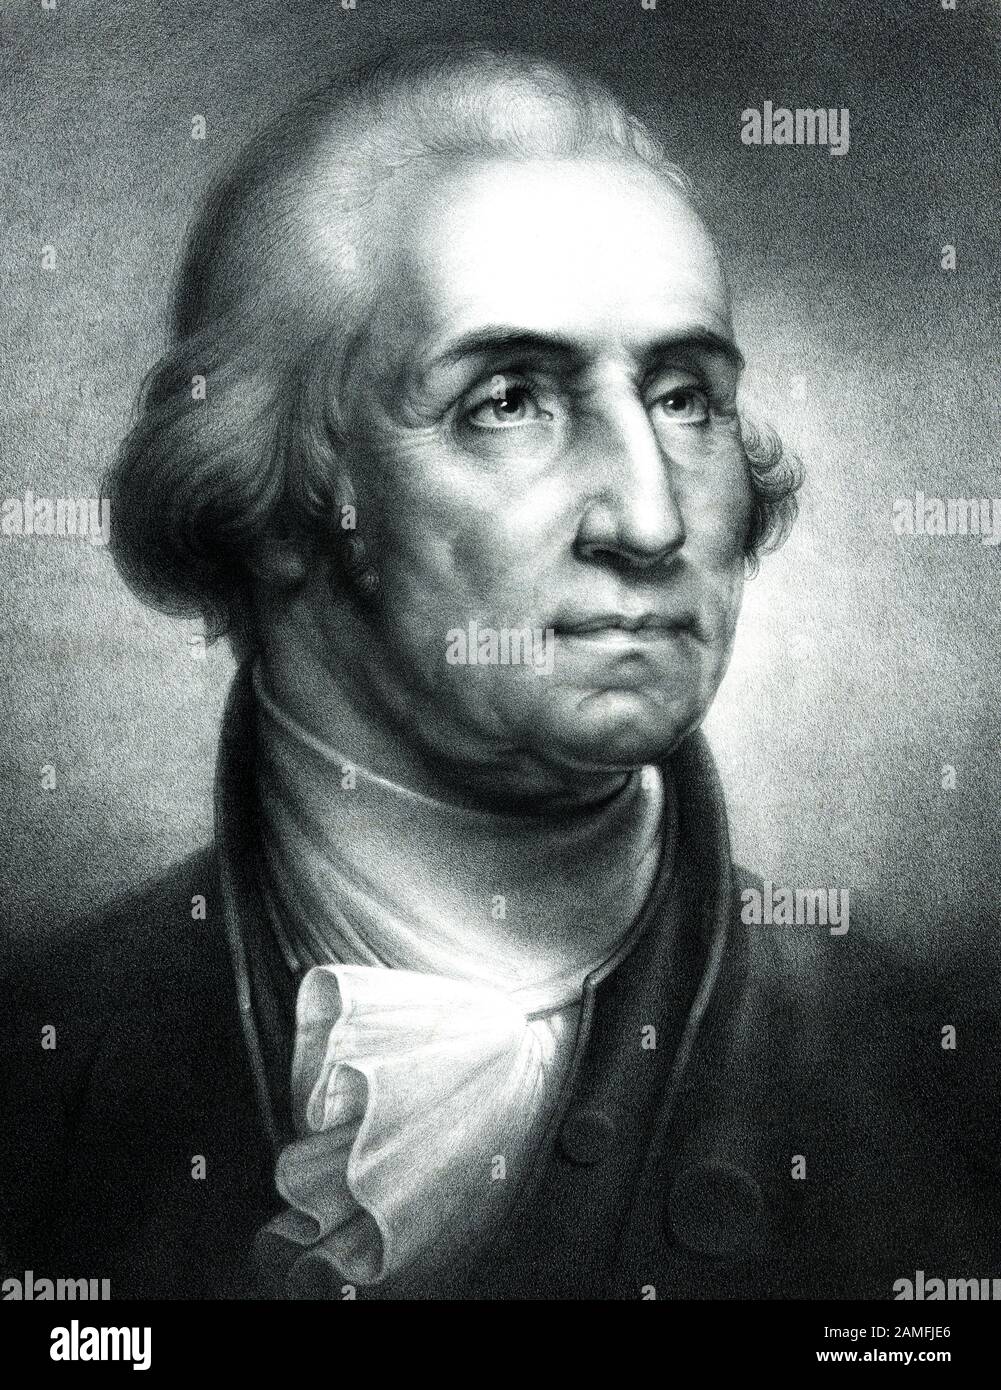 Vintage portrait of George Washington (1732 - 1799) – Commander of the Continental Army in the American Revolutionary War / War of Independence (1775 – 1783) and the first US President (1789 - 1797). Print circa 1856 by Duval & Co from a work by artist Rembrandt Peale (1778 – 1860). Stock Photo